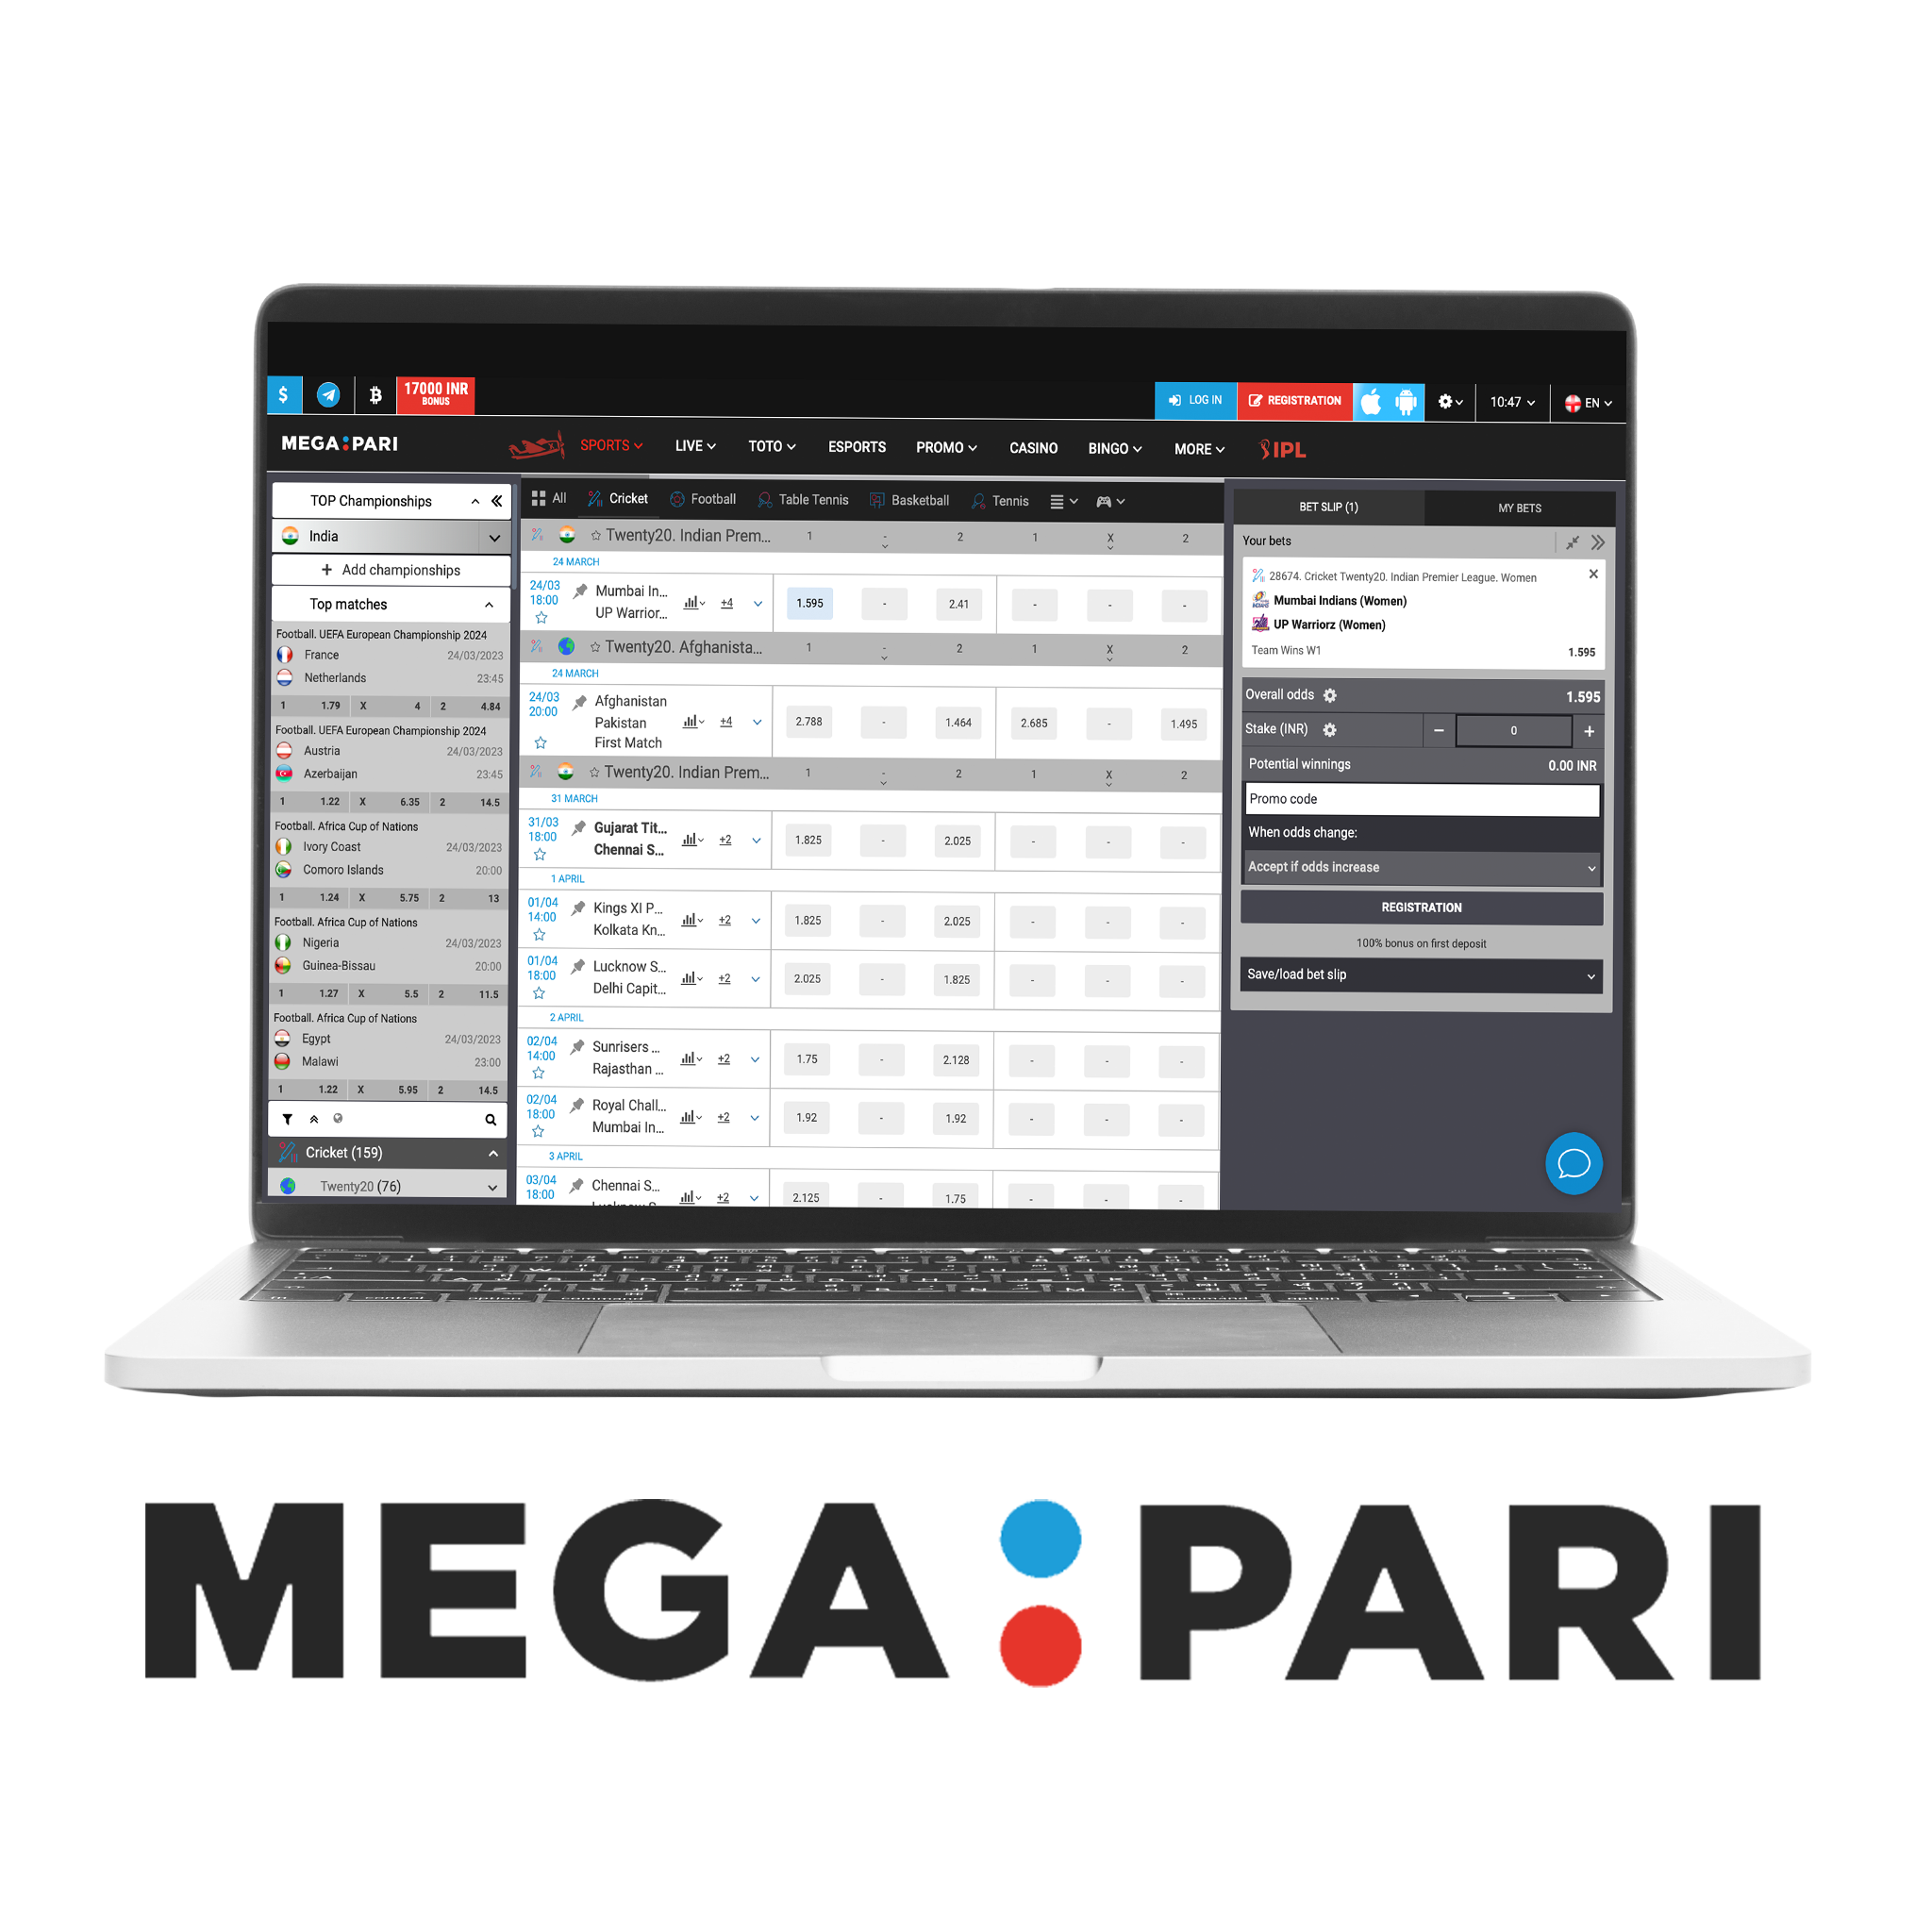 On Megapari you find cricket events available for betting.